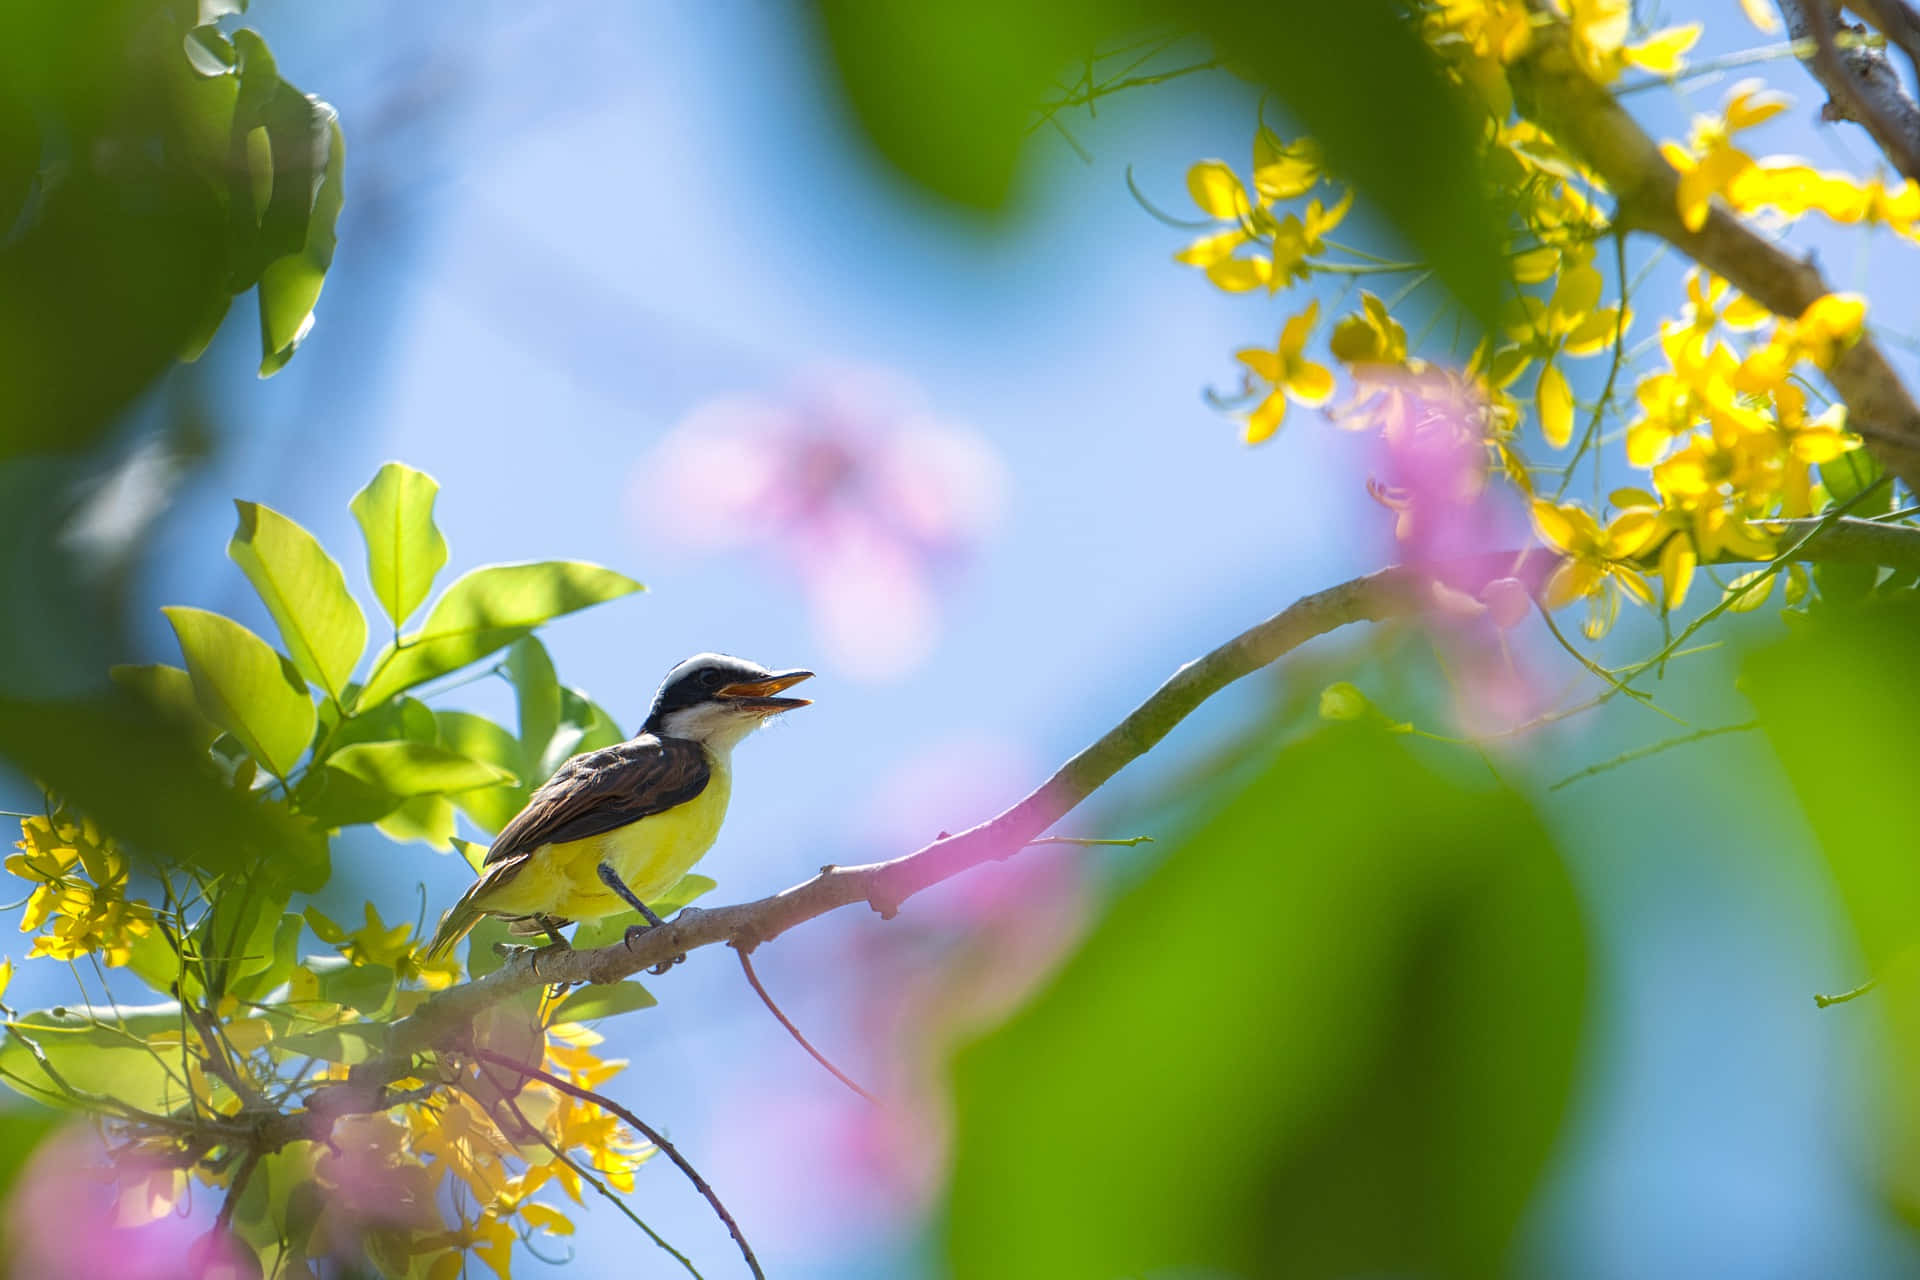 Vibrant birds chirping on a blossoming branch Wallpaper